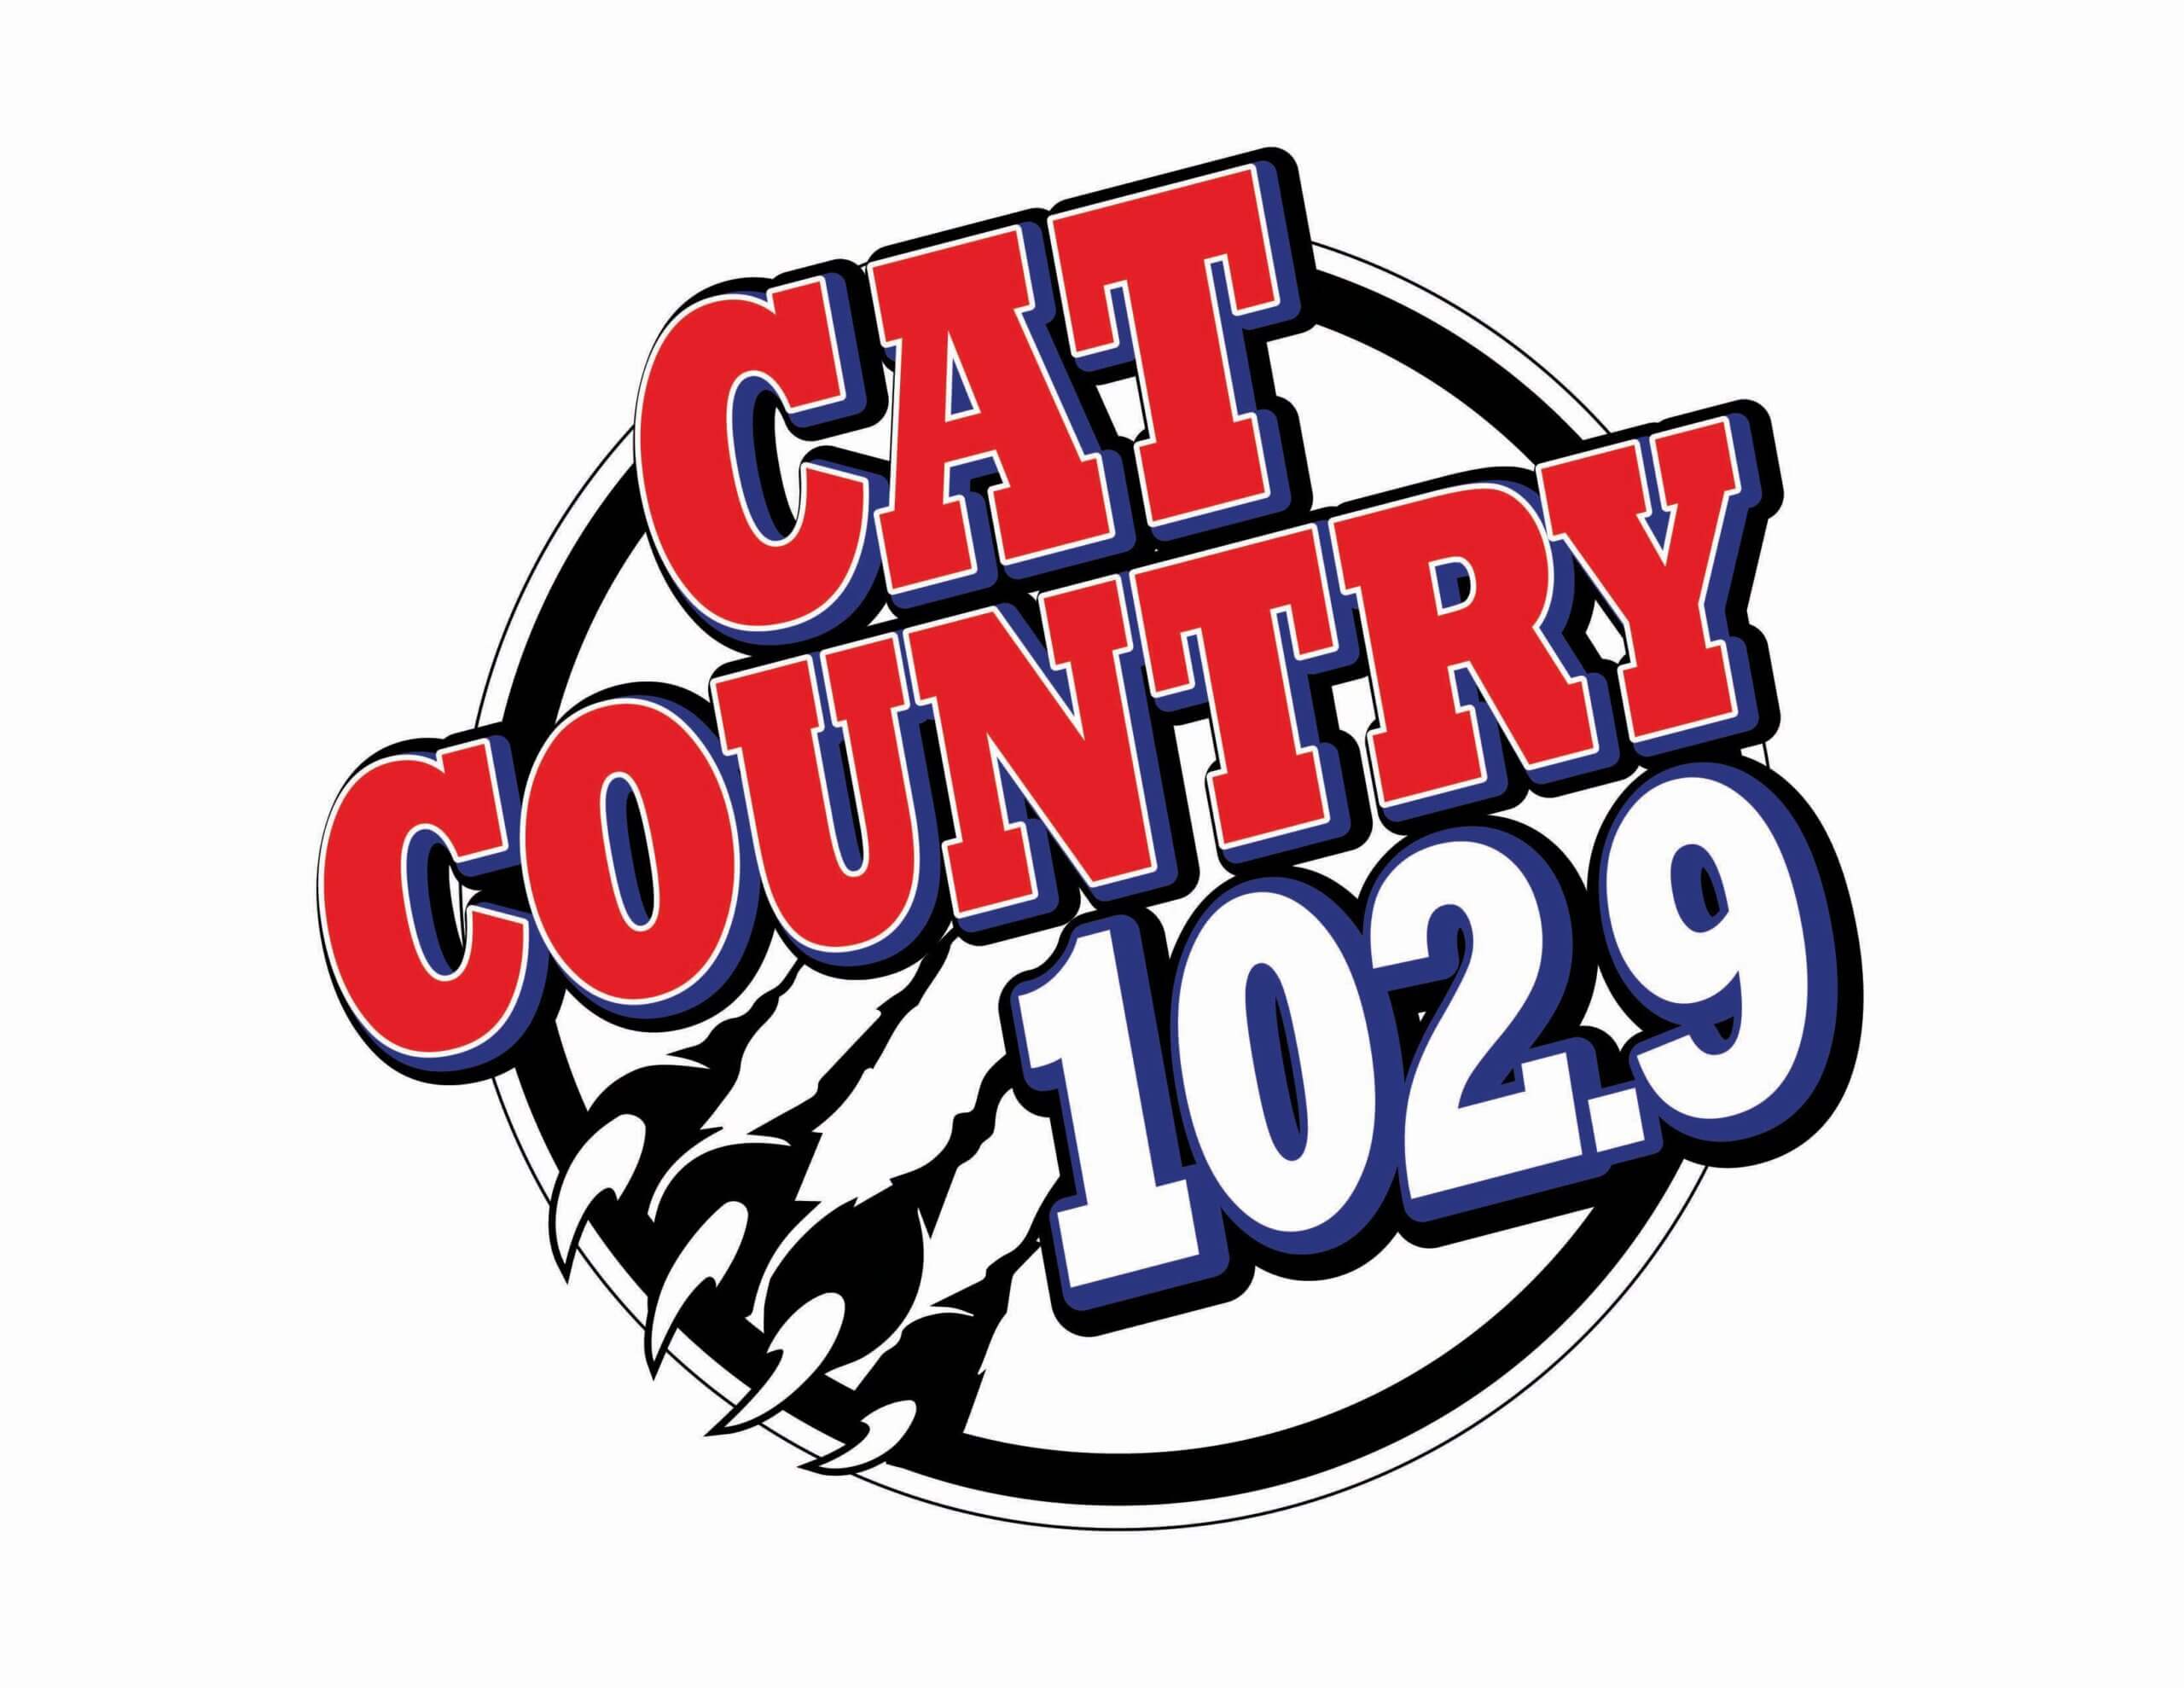 Cat Country102.9